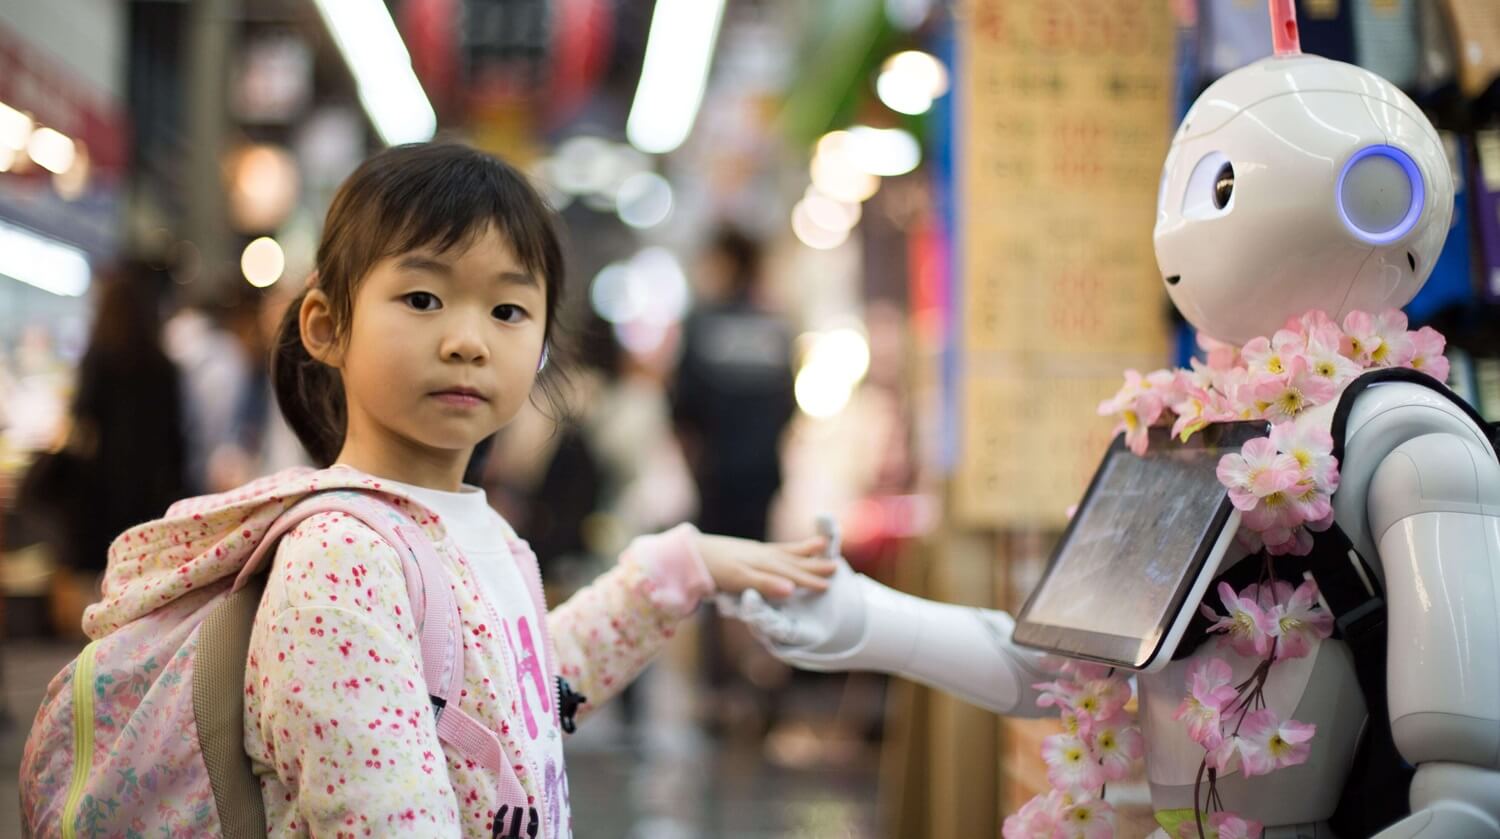 A girl interacting with robot